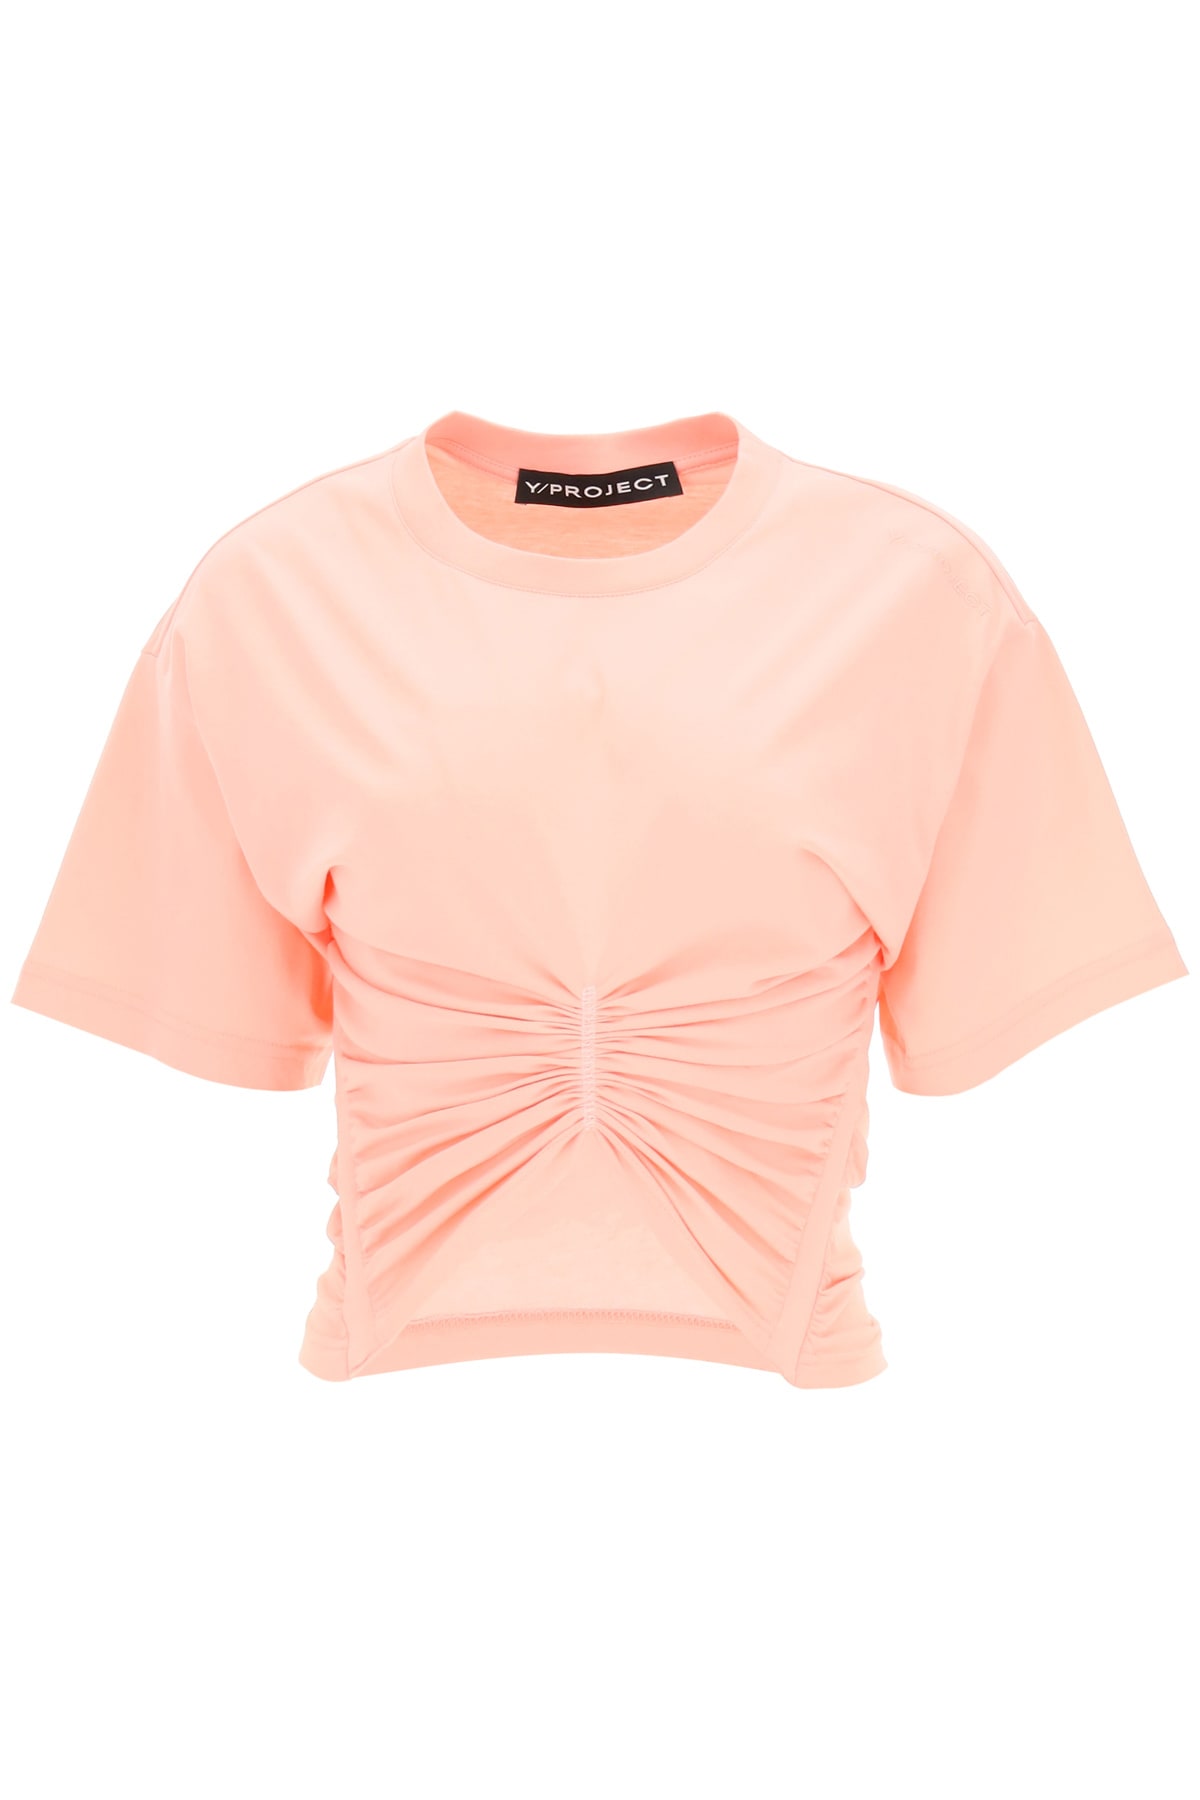 Y/Project Draped Cotton T-shirt